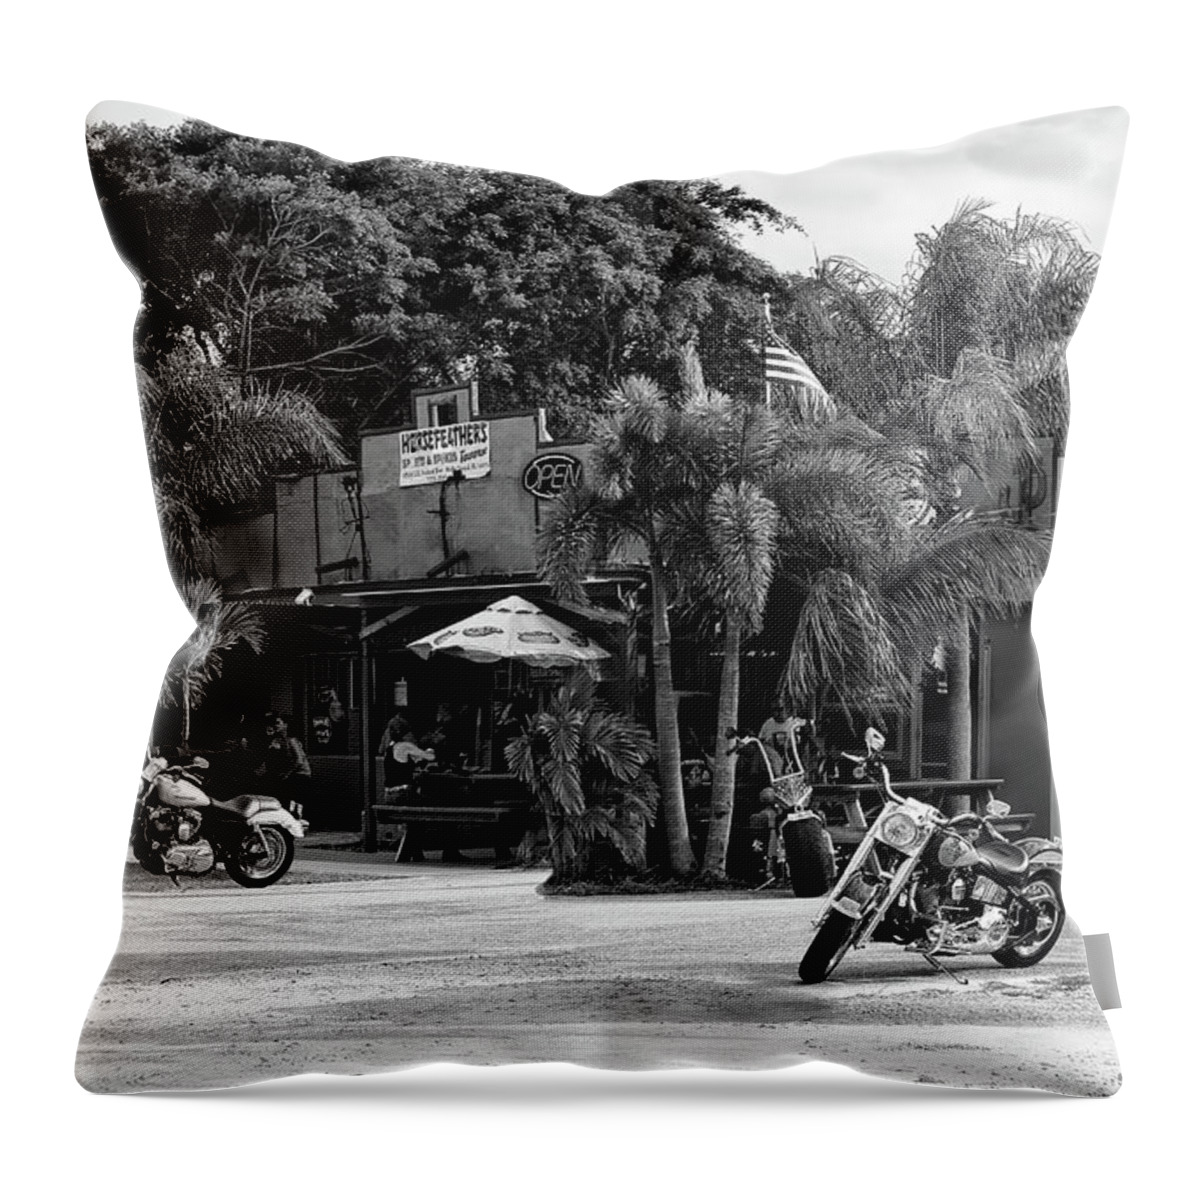 Motorcycle Throw Pillow featuring the photograph Roadhouse #3 by Laura Fasulo